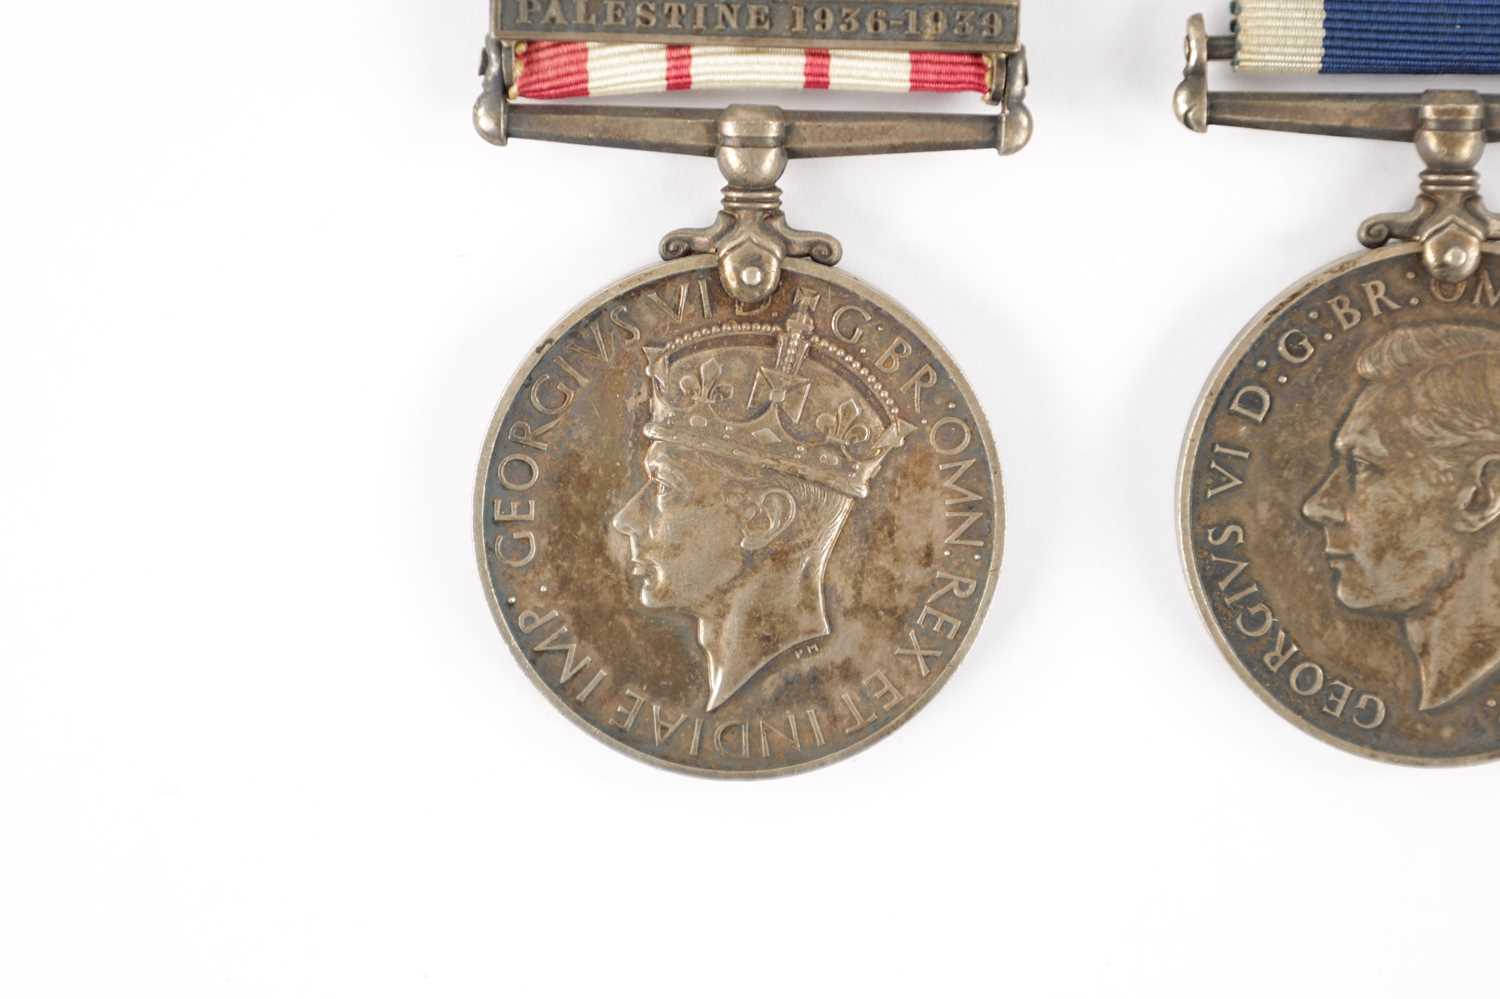 A GEORGE VI NAVAL GENERAL SERVICE MEDAL WITH PALESTINE 1936-1939 CLAPS AND ROYAL NAVY LONG SERVICE - Image 2 of 8